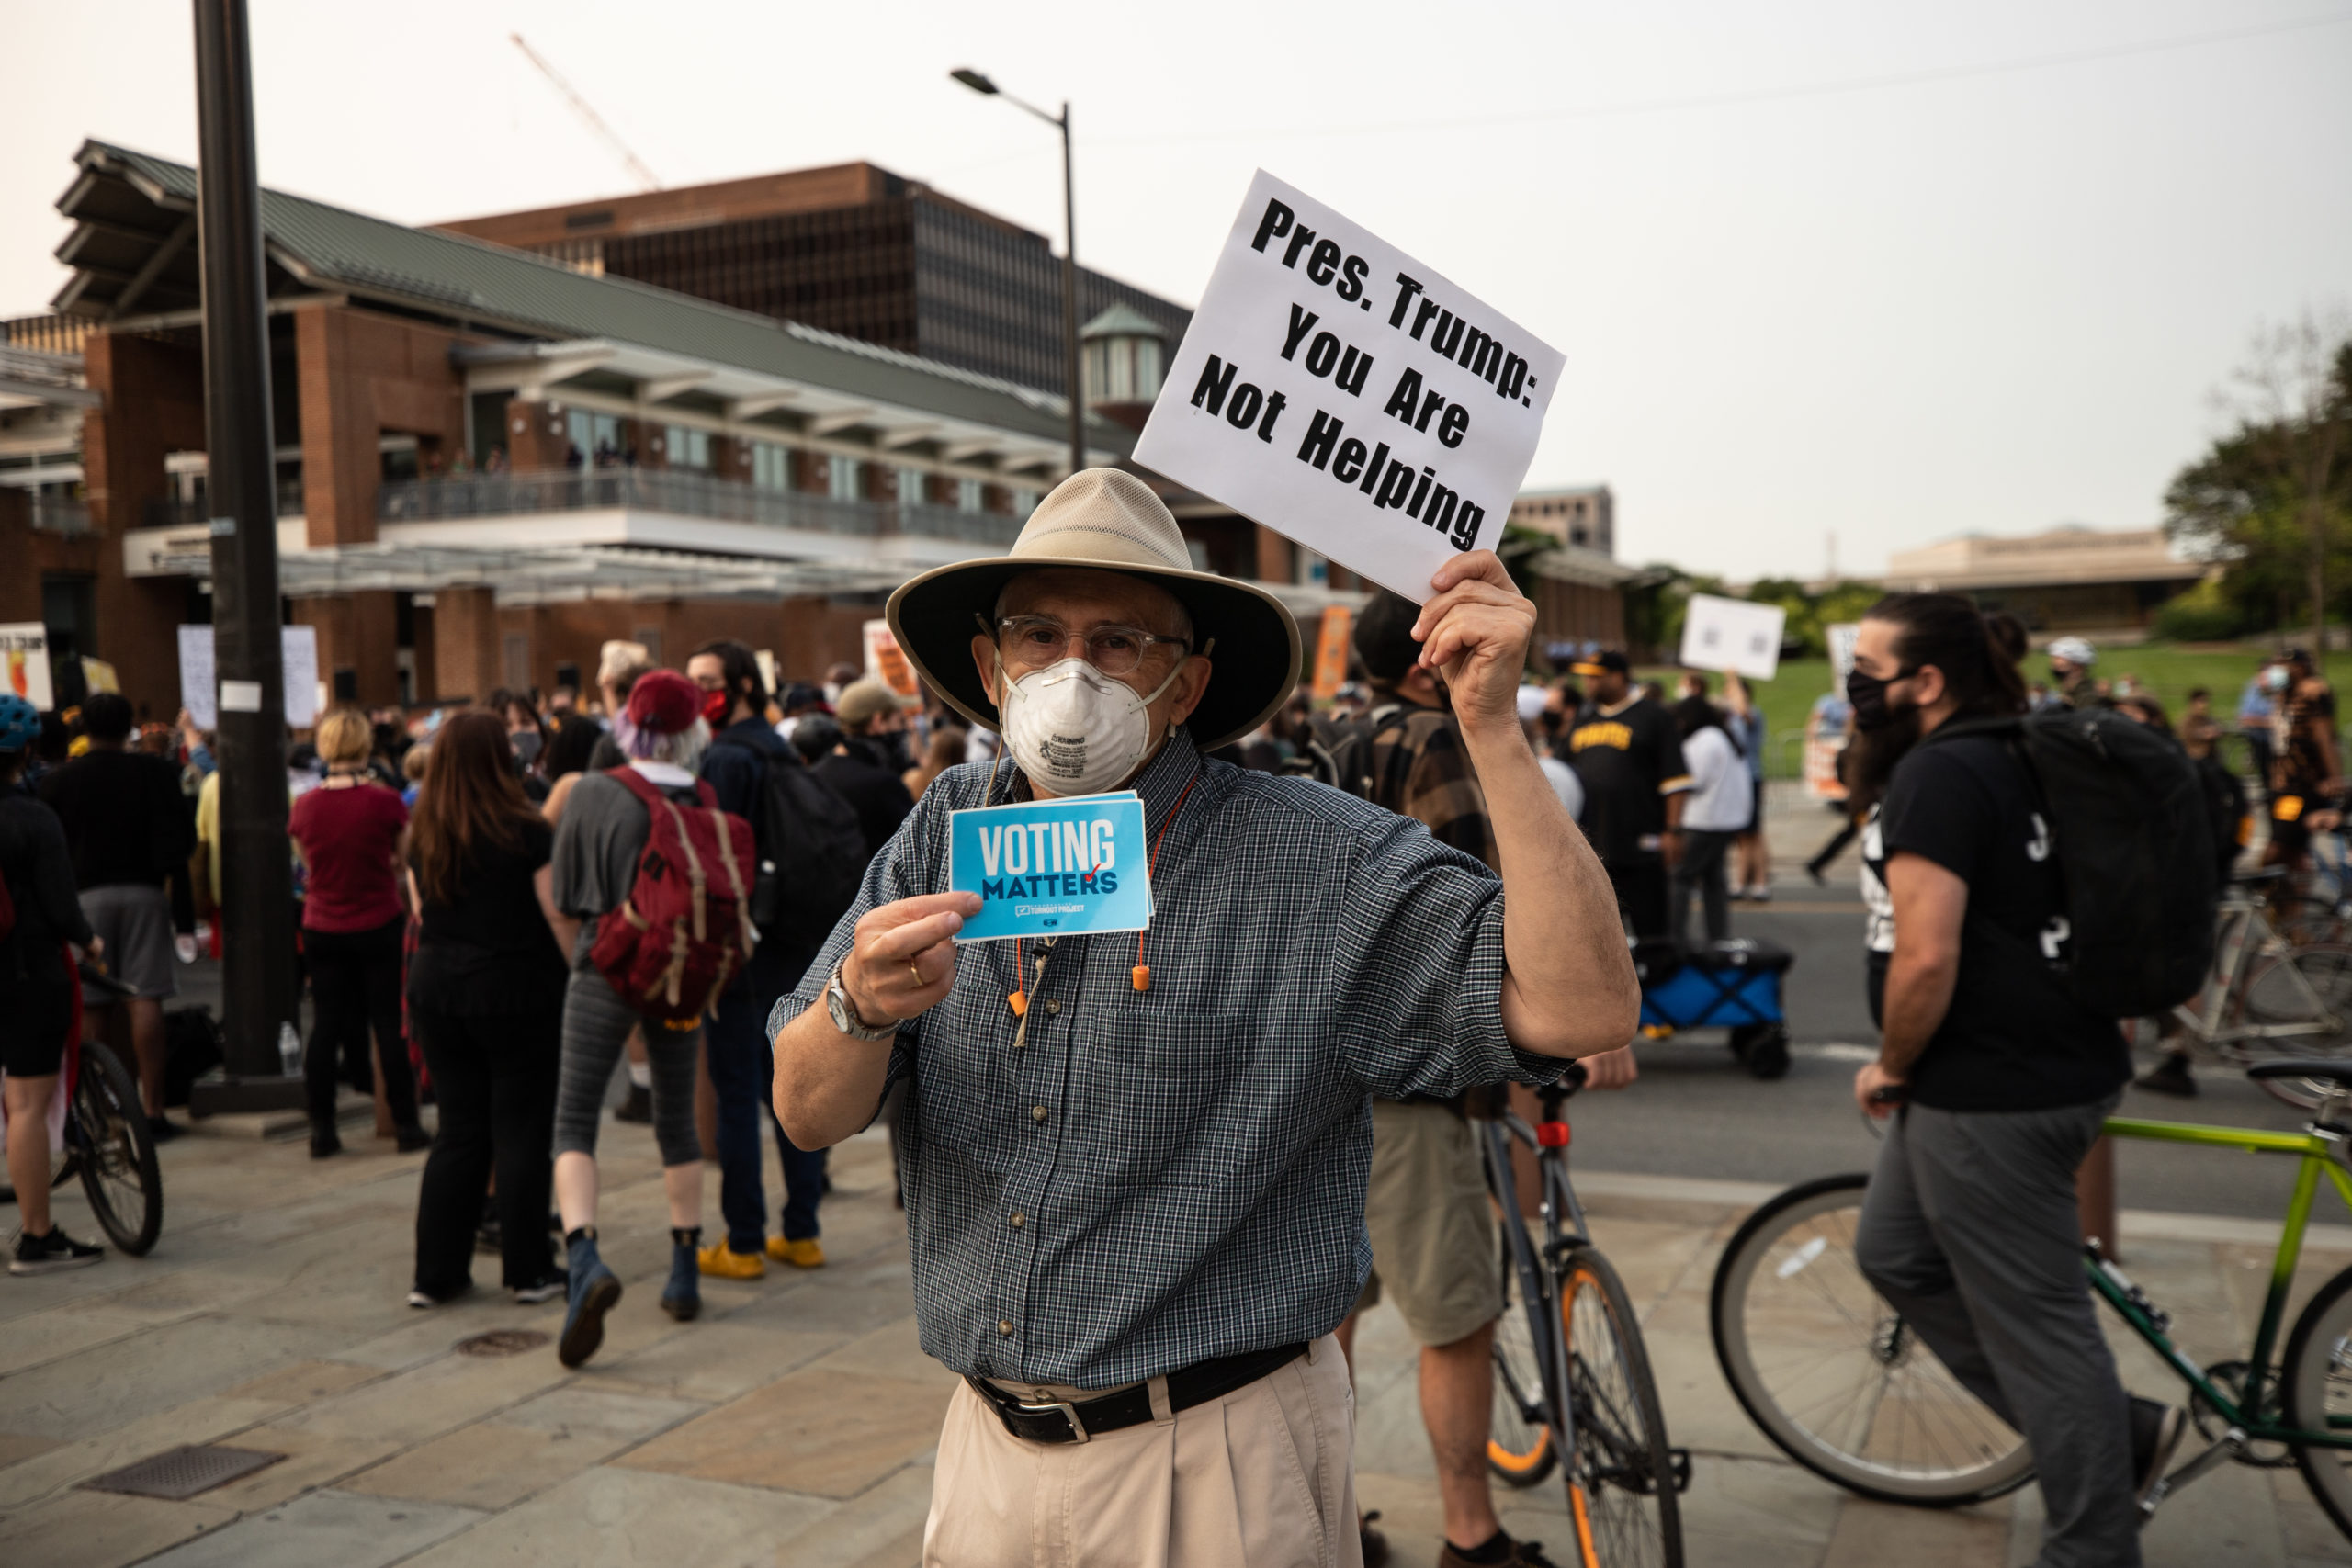 A man encourages protesters to vote in the upcoming election in Philadelphia, Pennsylvania on Sept. 15, 2020. (Photo: Kaylee Greenlee / DCNF)